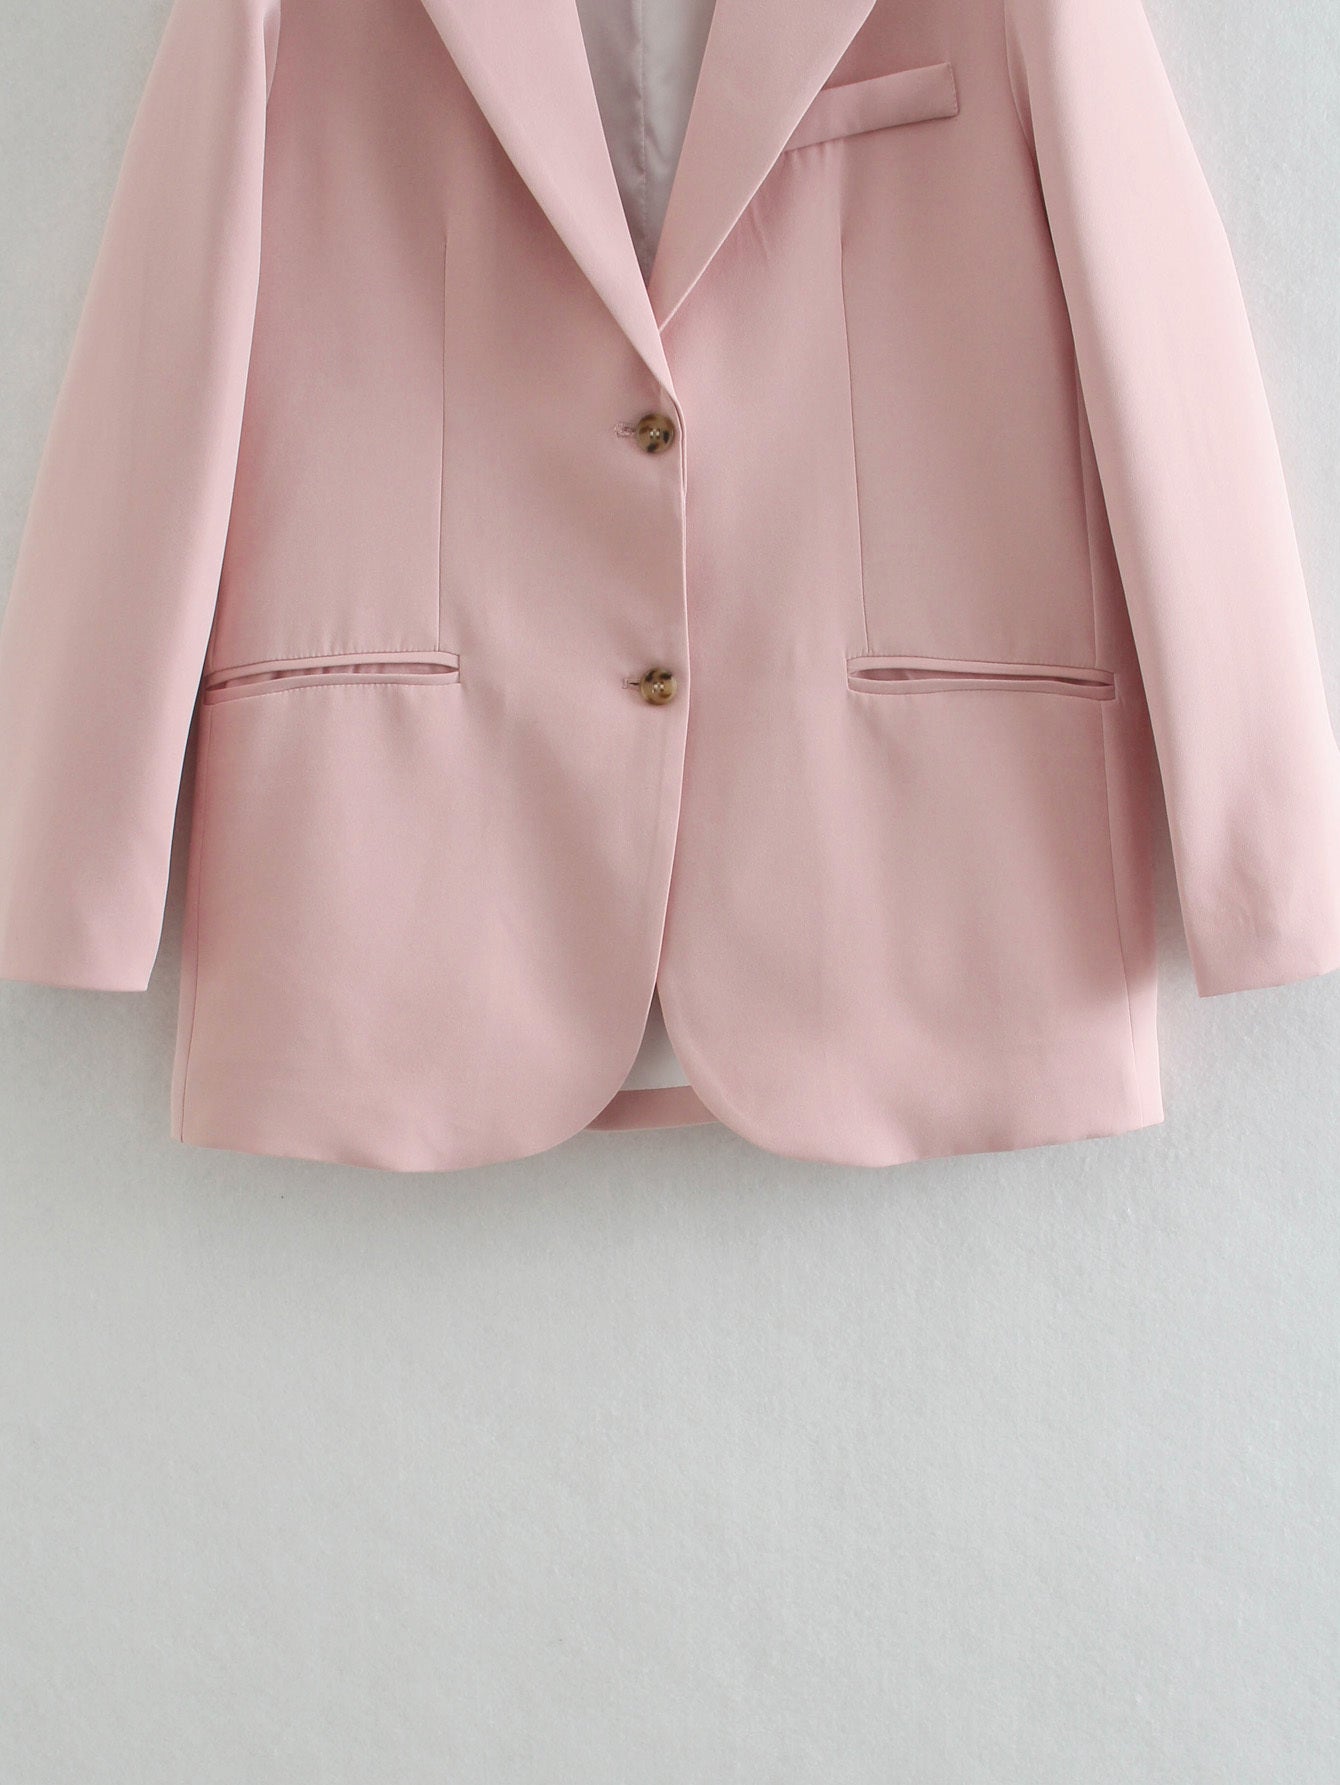 Pink Lady Separate Suit